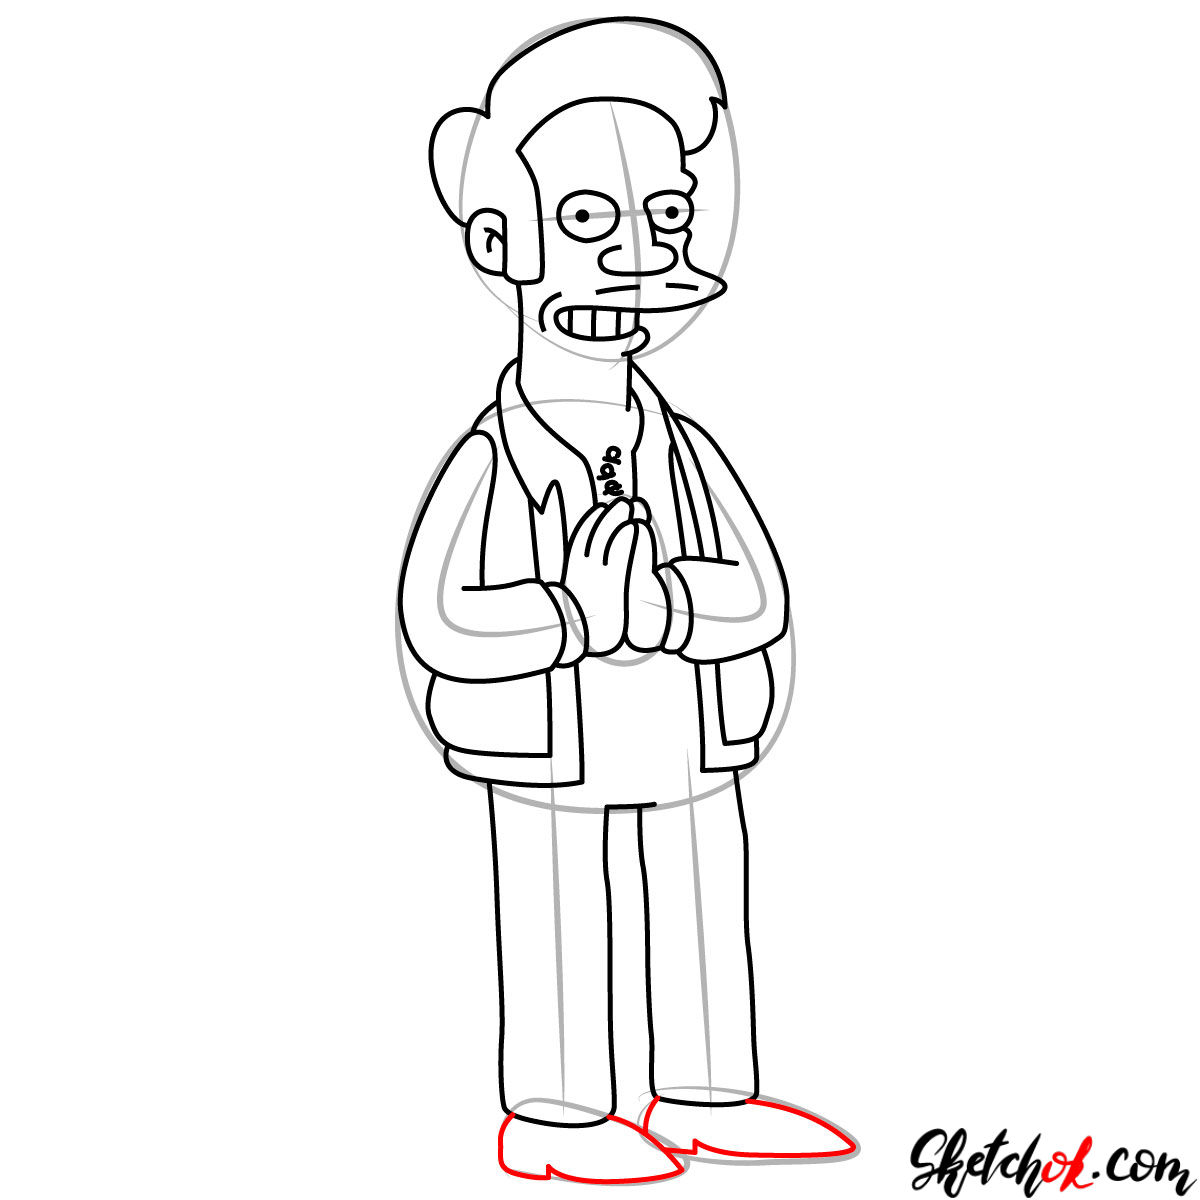 How to draw Apu from The Simpsons series - Sketchok easy drawing guides